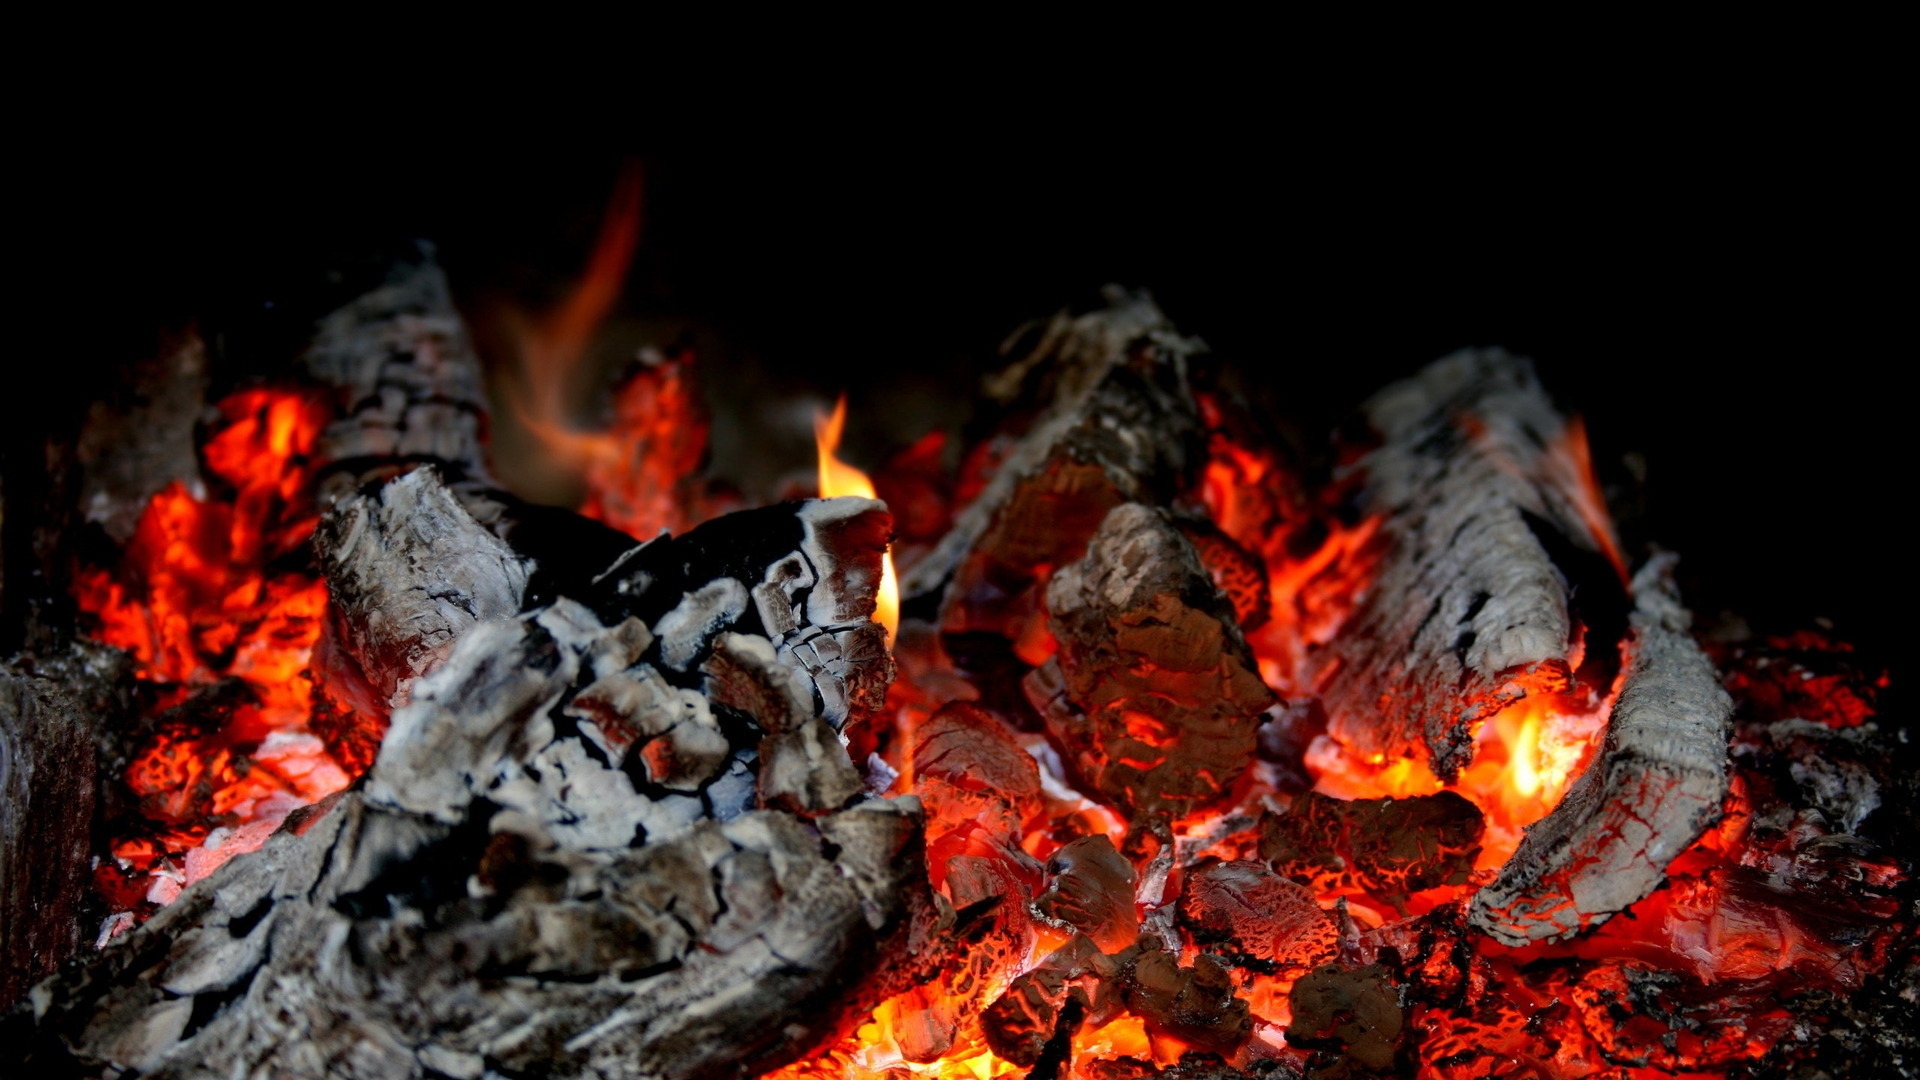 Hot Coals for 1920 x 1080 HDTV 1080p resolution